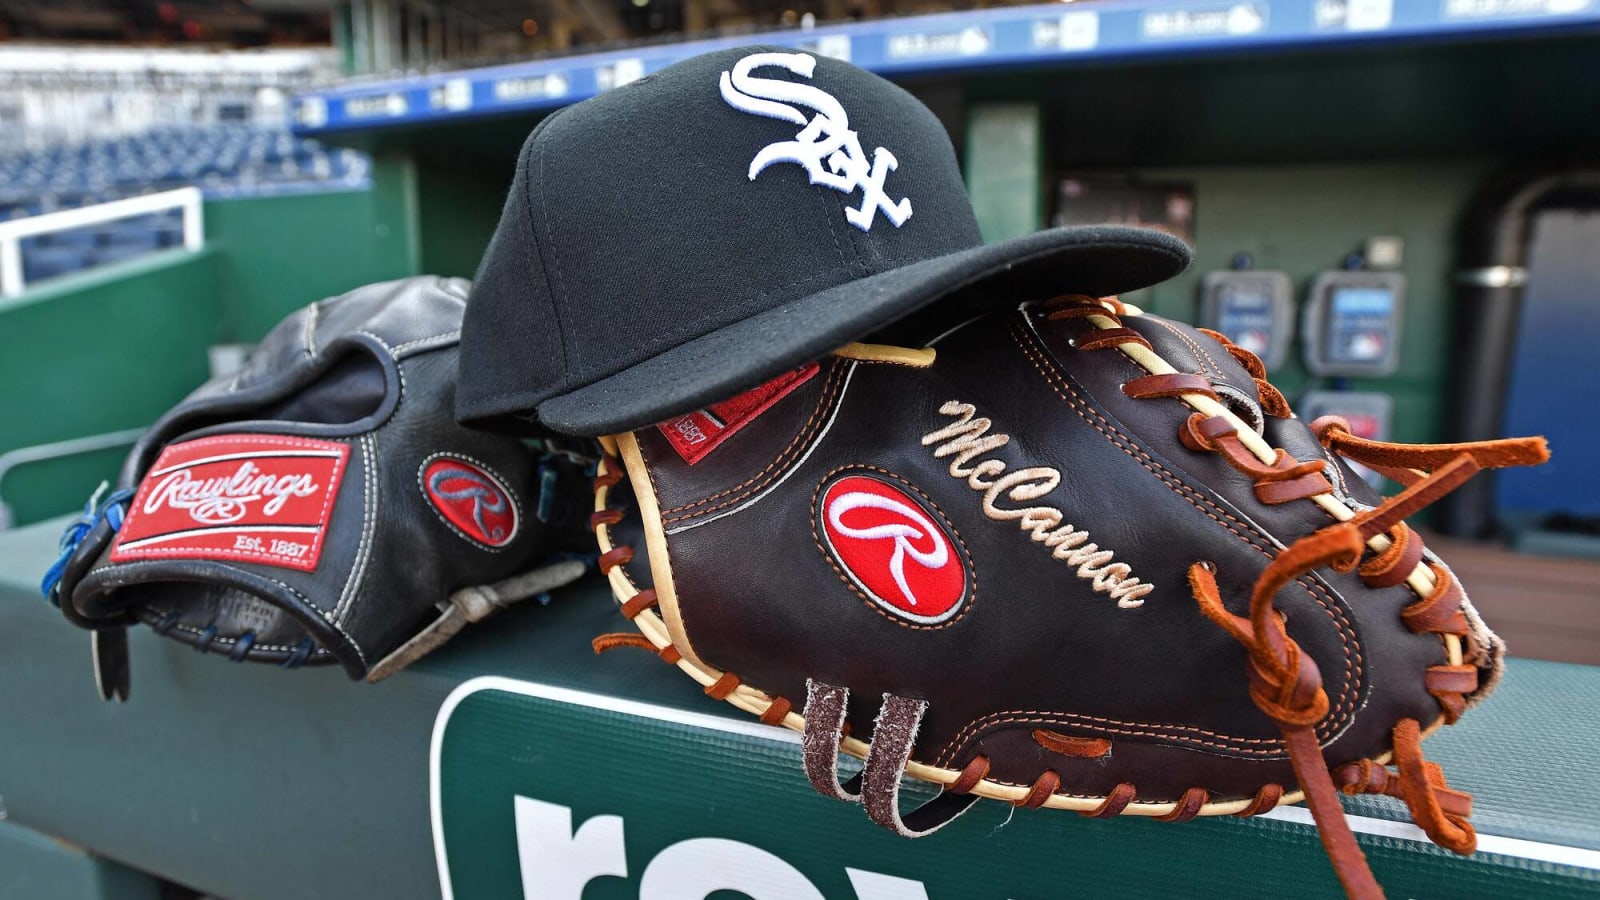 Report: White Sox in 'serious' talks to build a new stadium in the South Loop